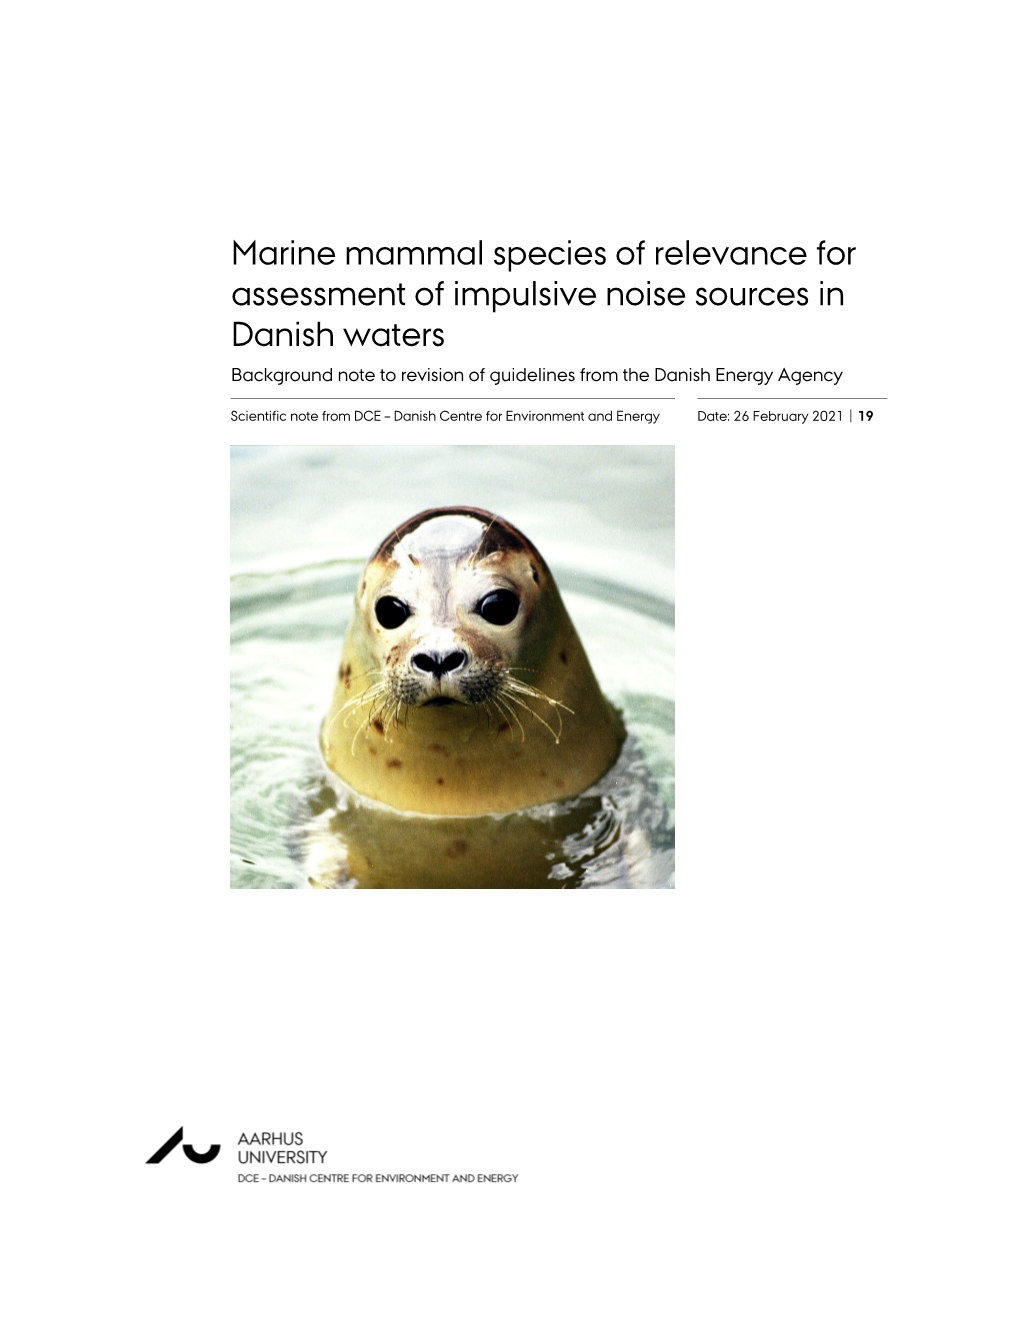 Marine Mammal Species of Relevance for Assessment of Impulsive Noise Sources in Danish Waters Background Note to Revision of Guidelines from the Danish Energy Agency